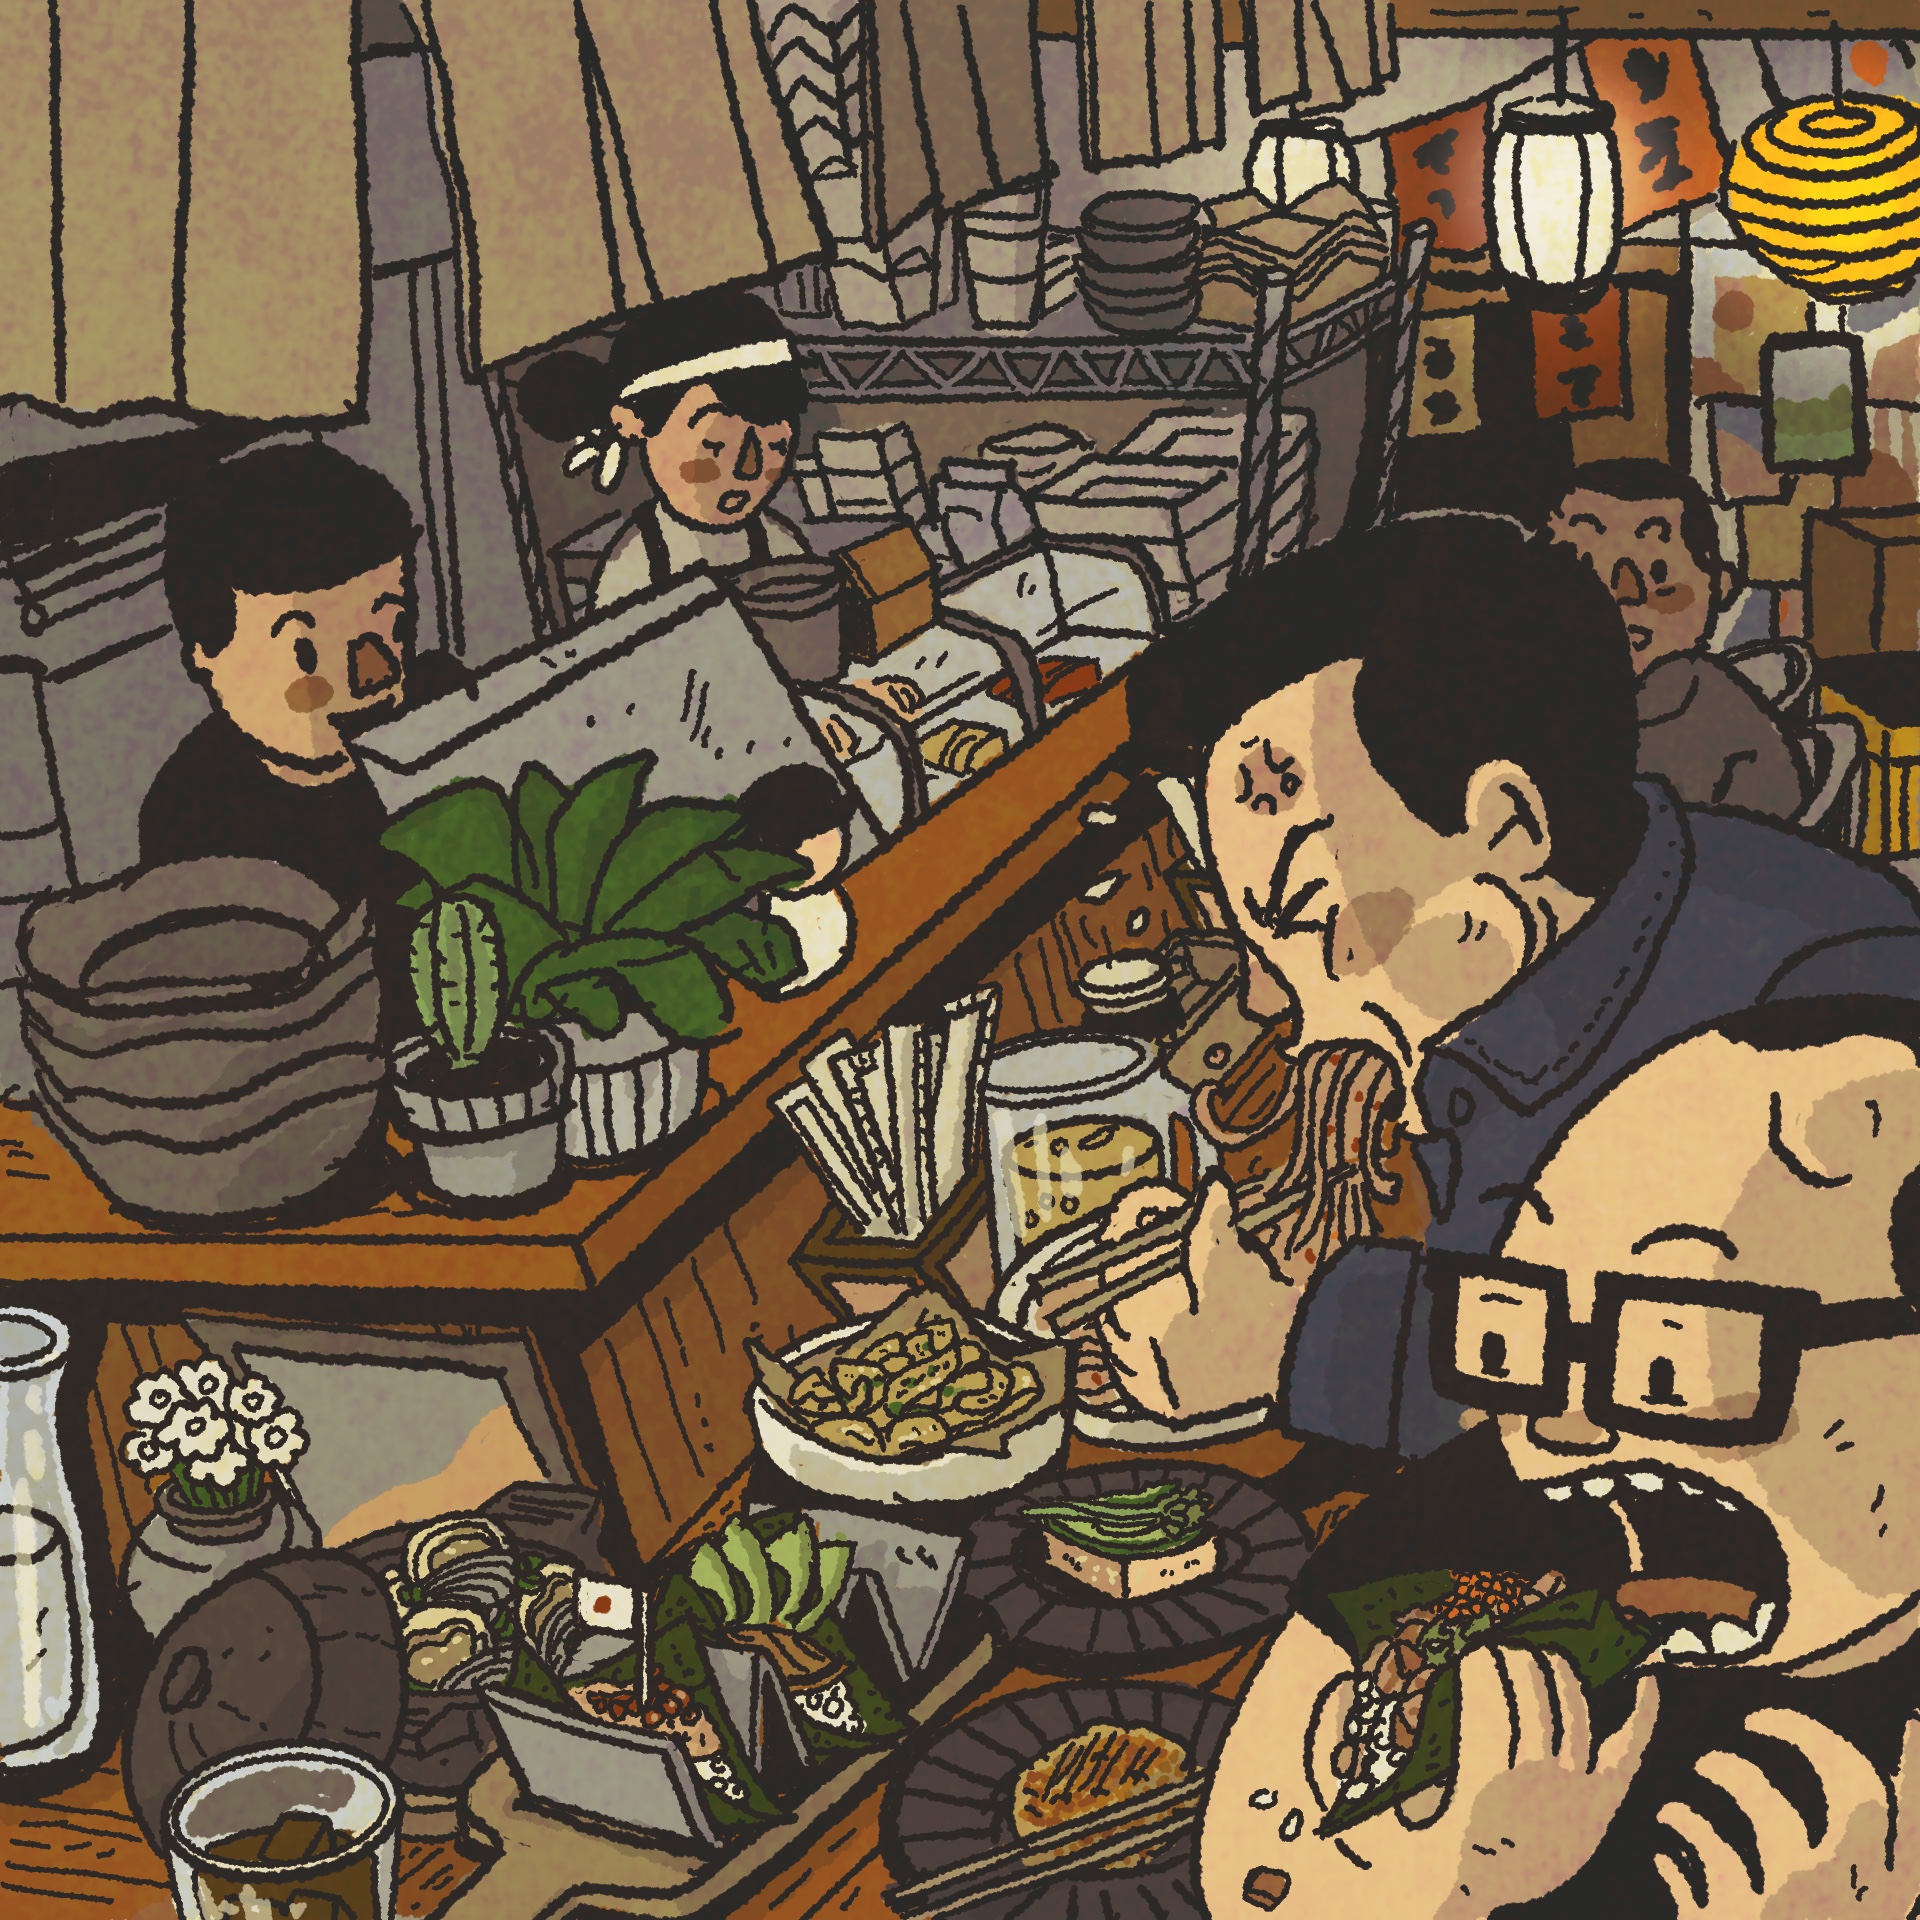 Illustration: Two men eating noodles and sushi hand rolls at a bar counter.